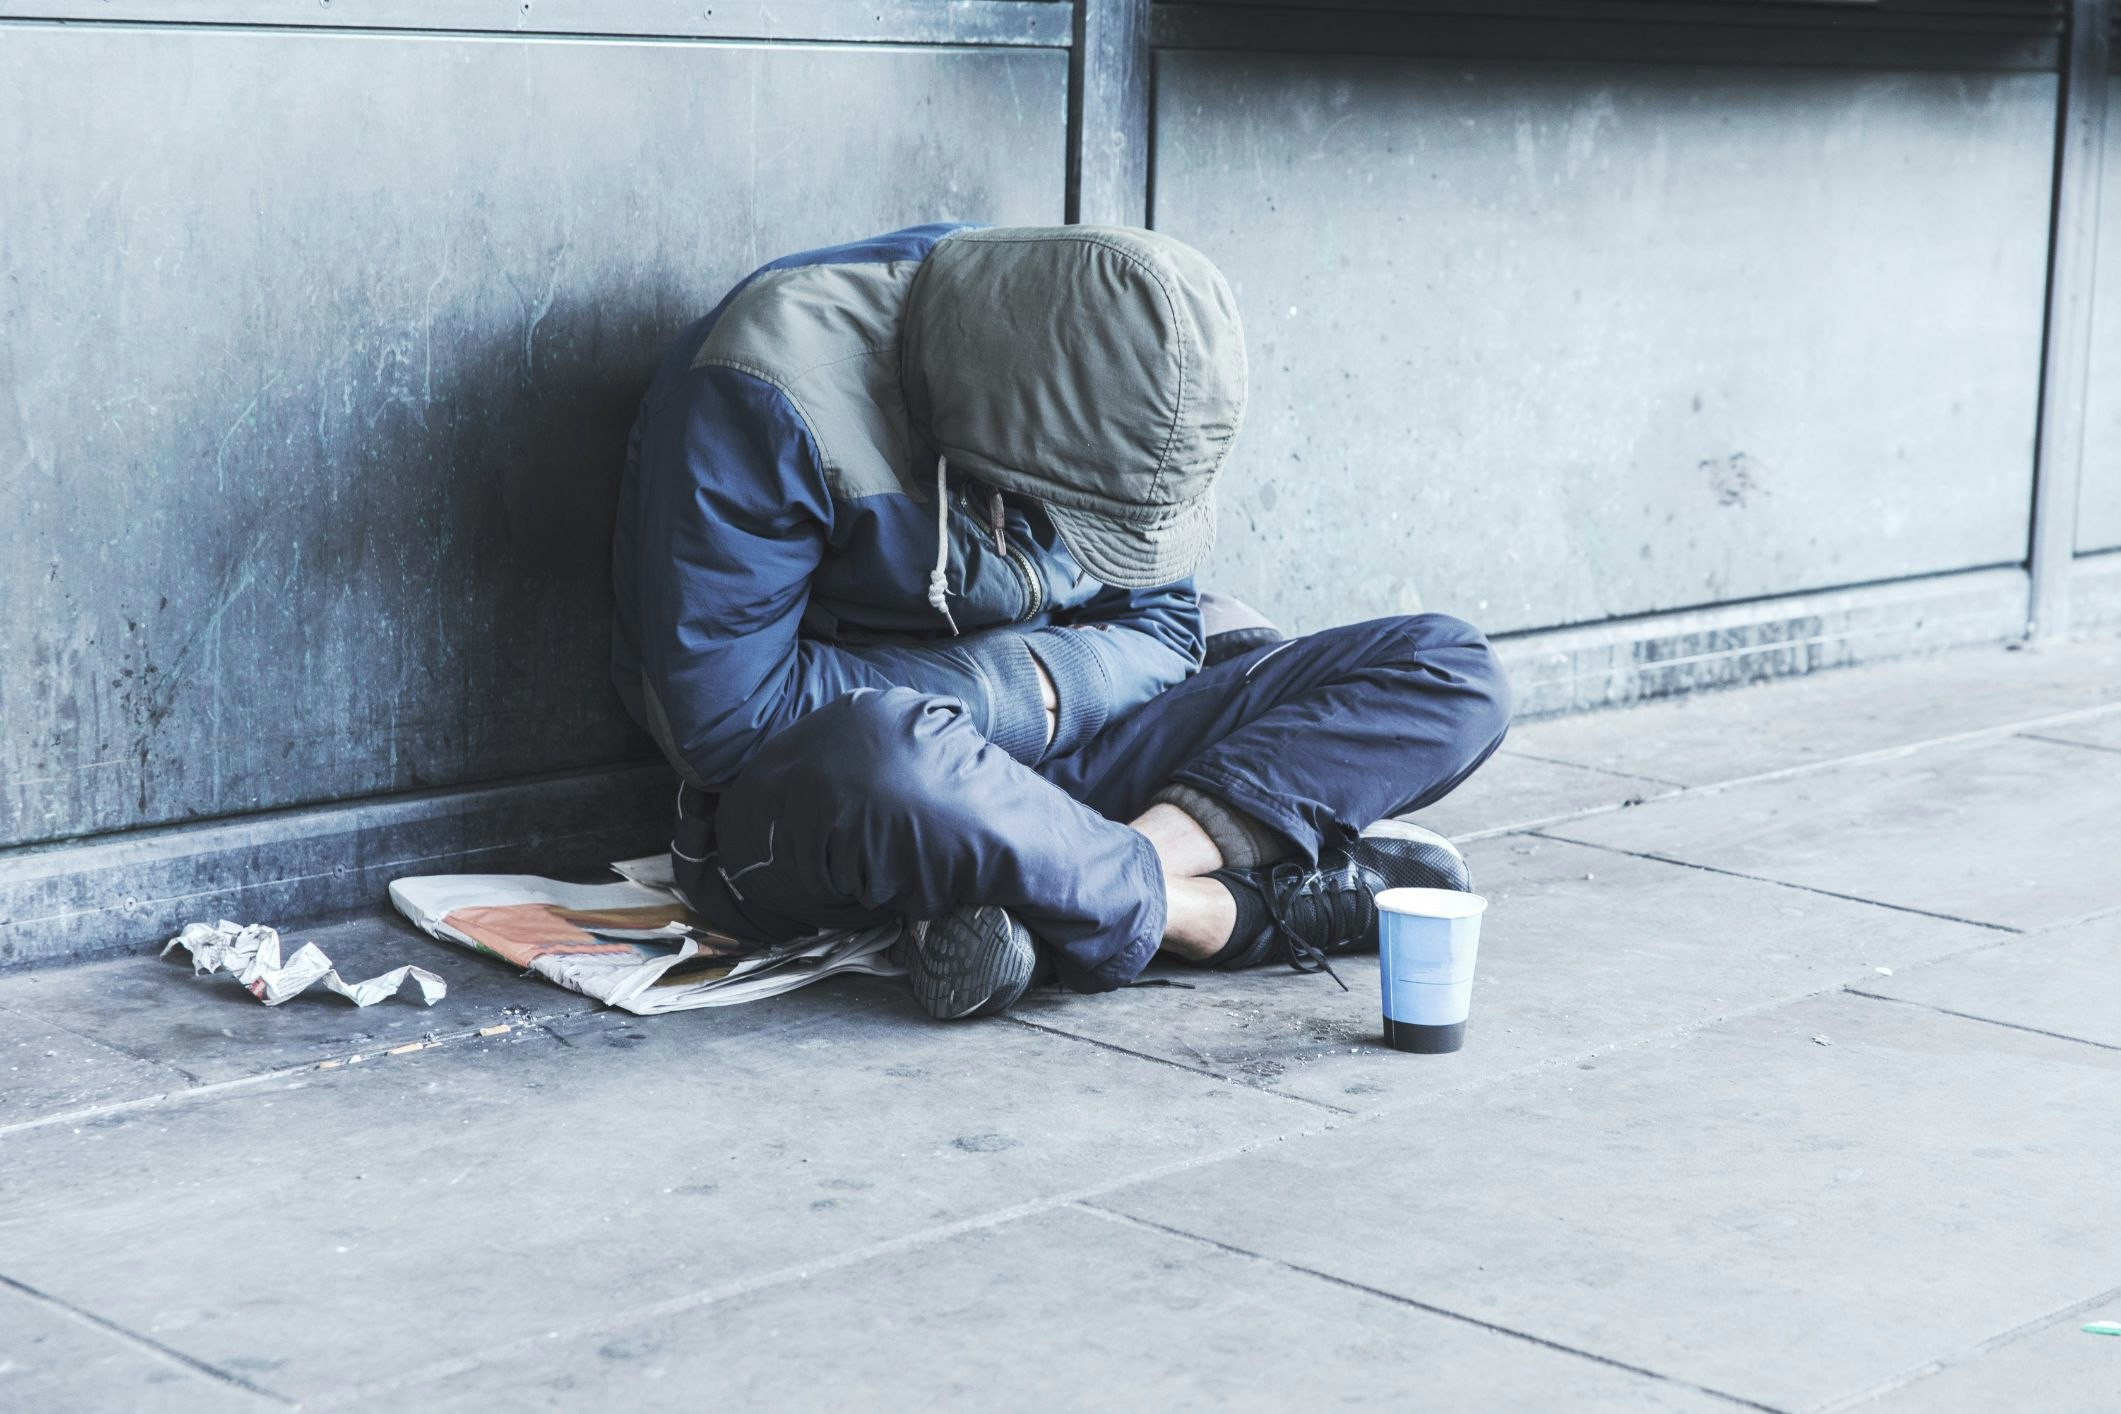 <p>With temperatures dropping this winter, a Code Blue notice has been released to provide better support to vulnerable people experiencing homelessness. [Source: Shutterstock]</p>
